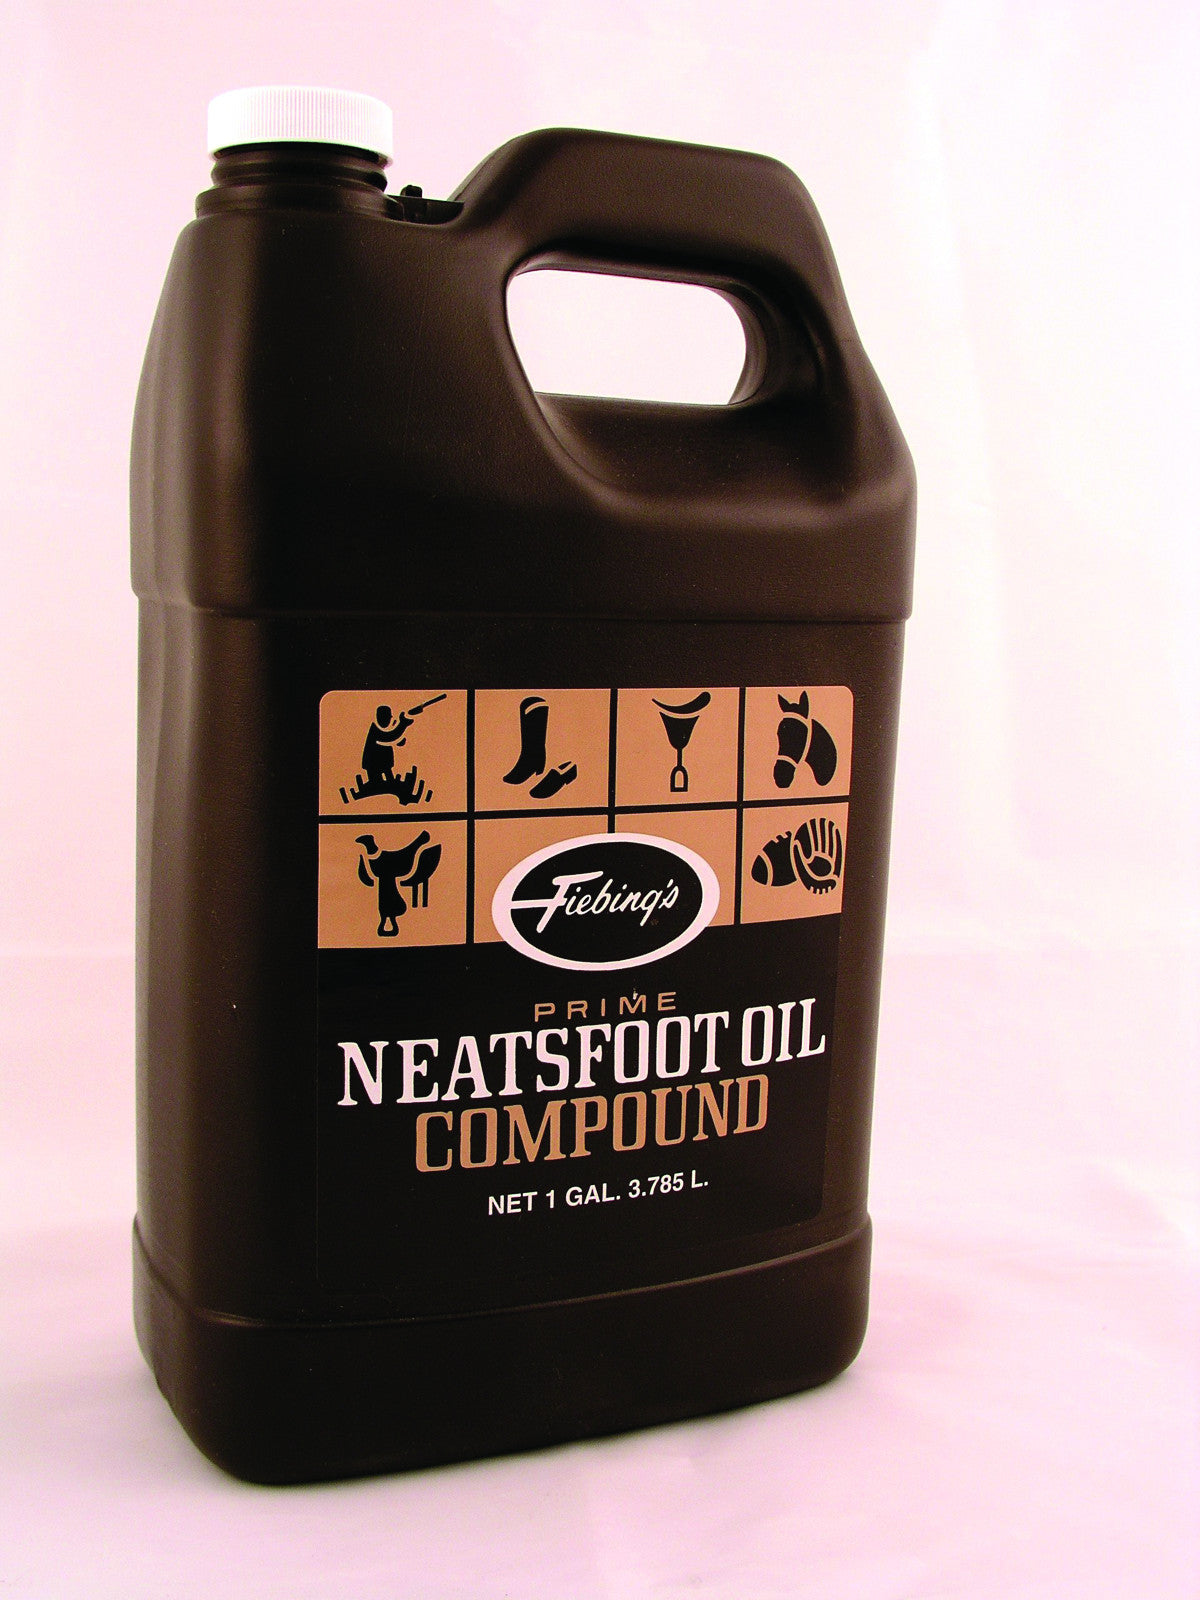 Prime Neatsfoot Oil Compound